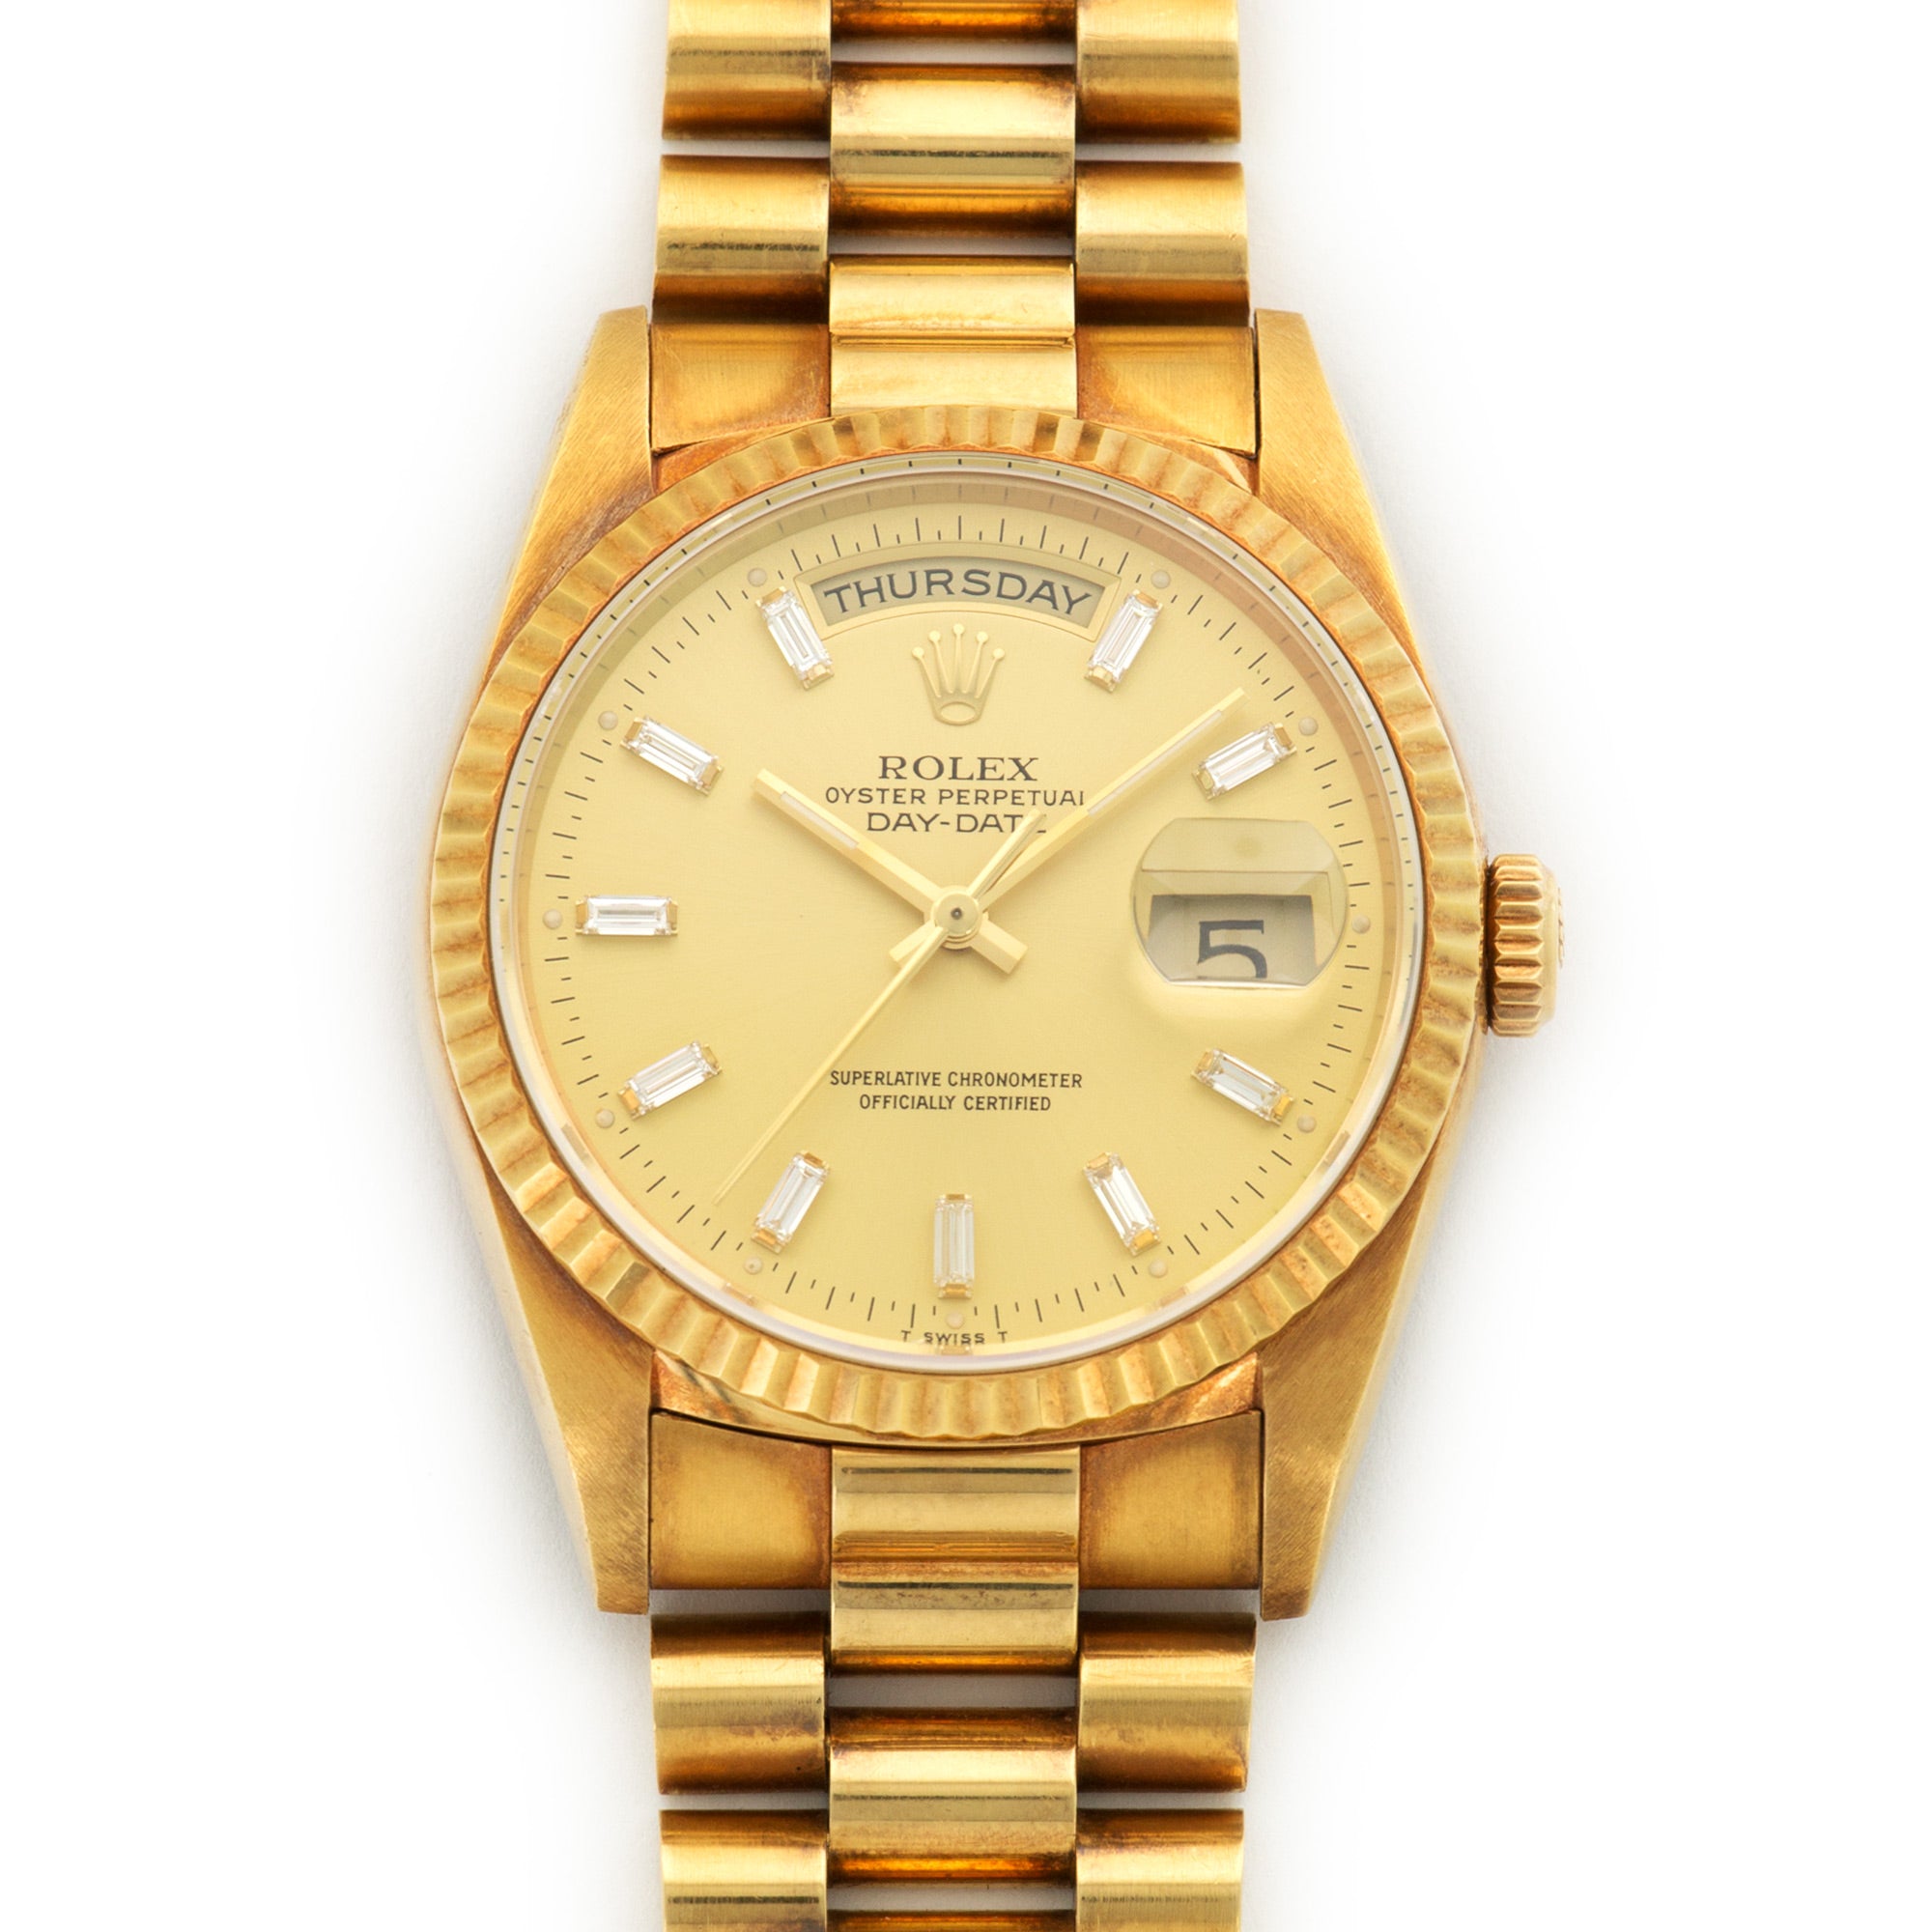 Rolex - Rolex Yellow Gold Day-Date Baguette Diamond Watch - The Keystone Watches